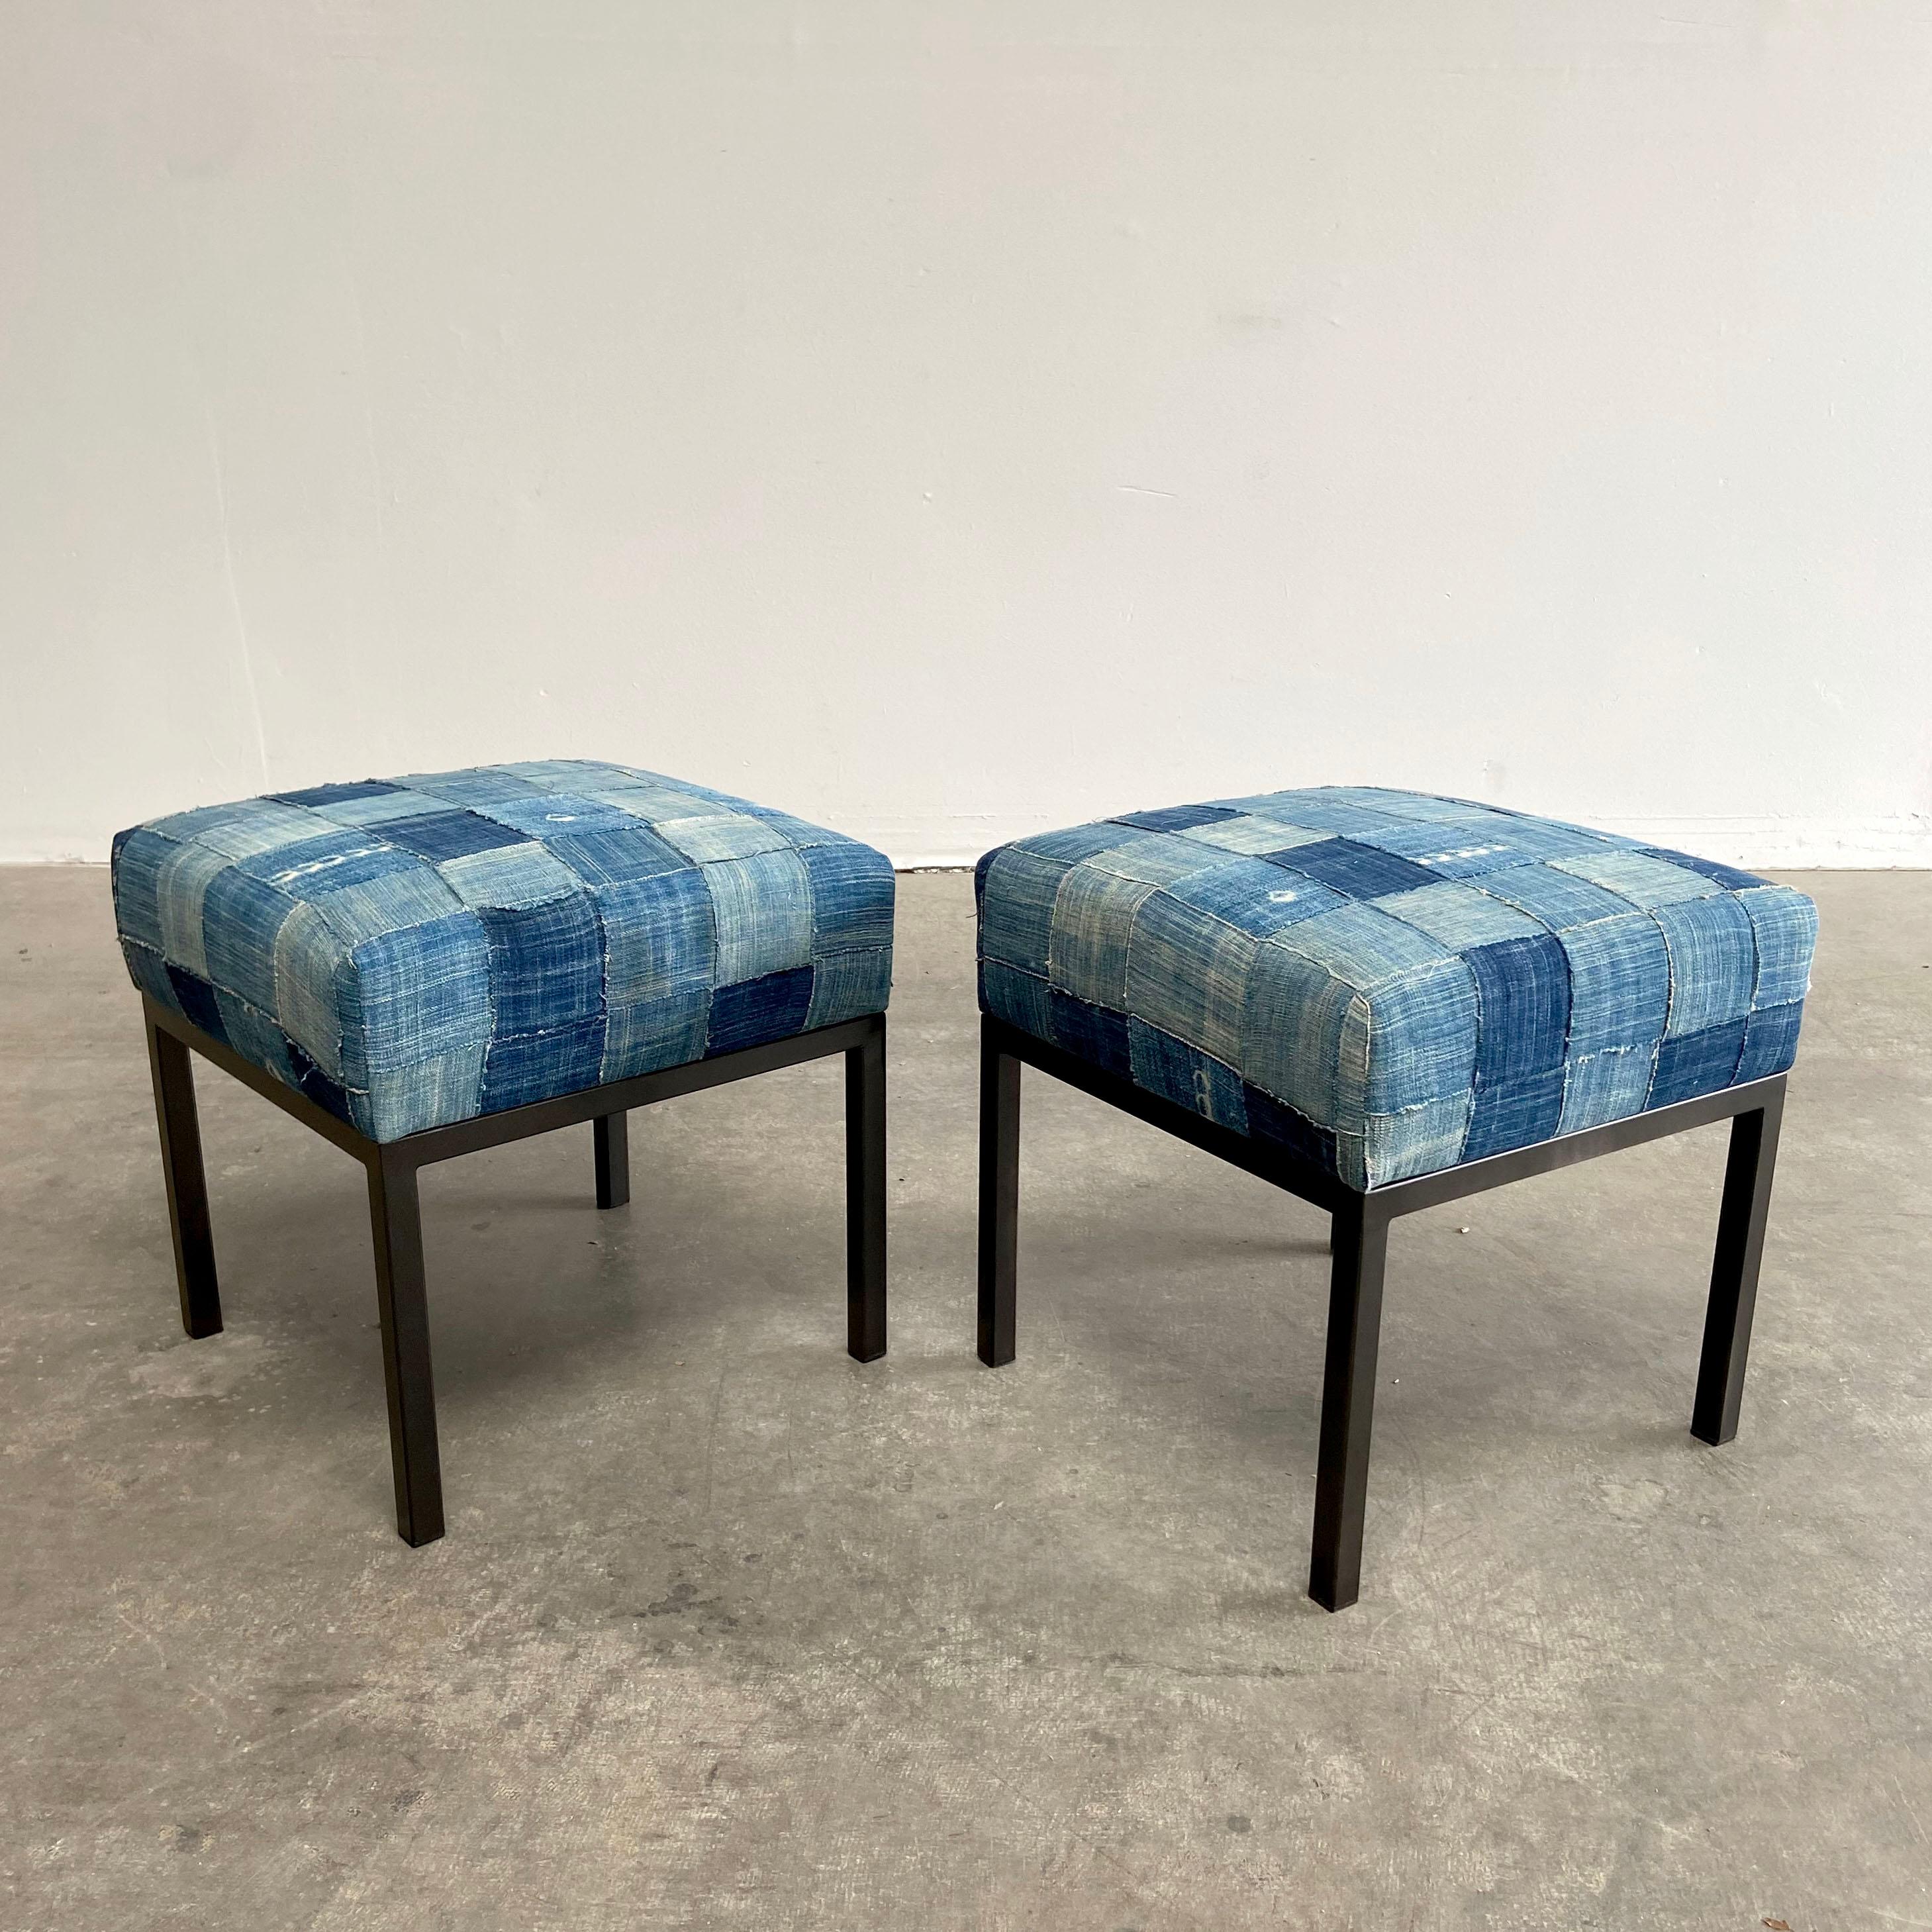 Custom made by bloom home inc, we've designed these stools for extra seating.
They are upholstered in a basket woven textured antique indigo blue batik cloth, that has been fully lined. The background color is a beautiful mix of indigo, faded and